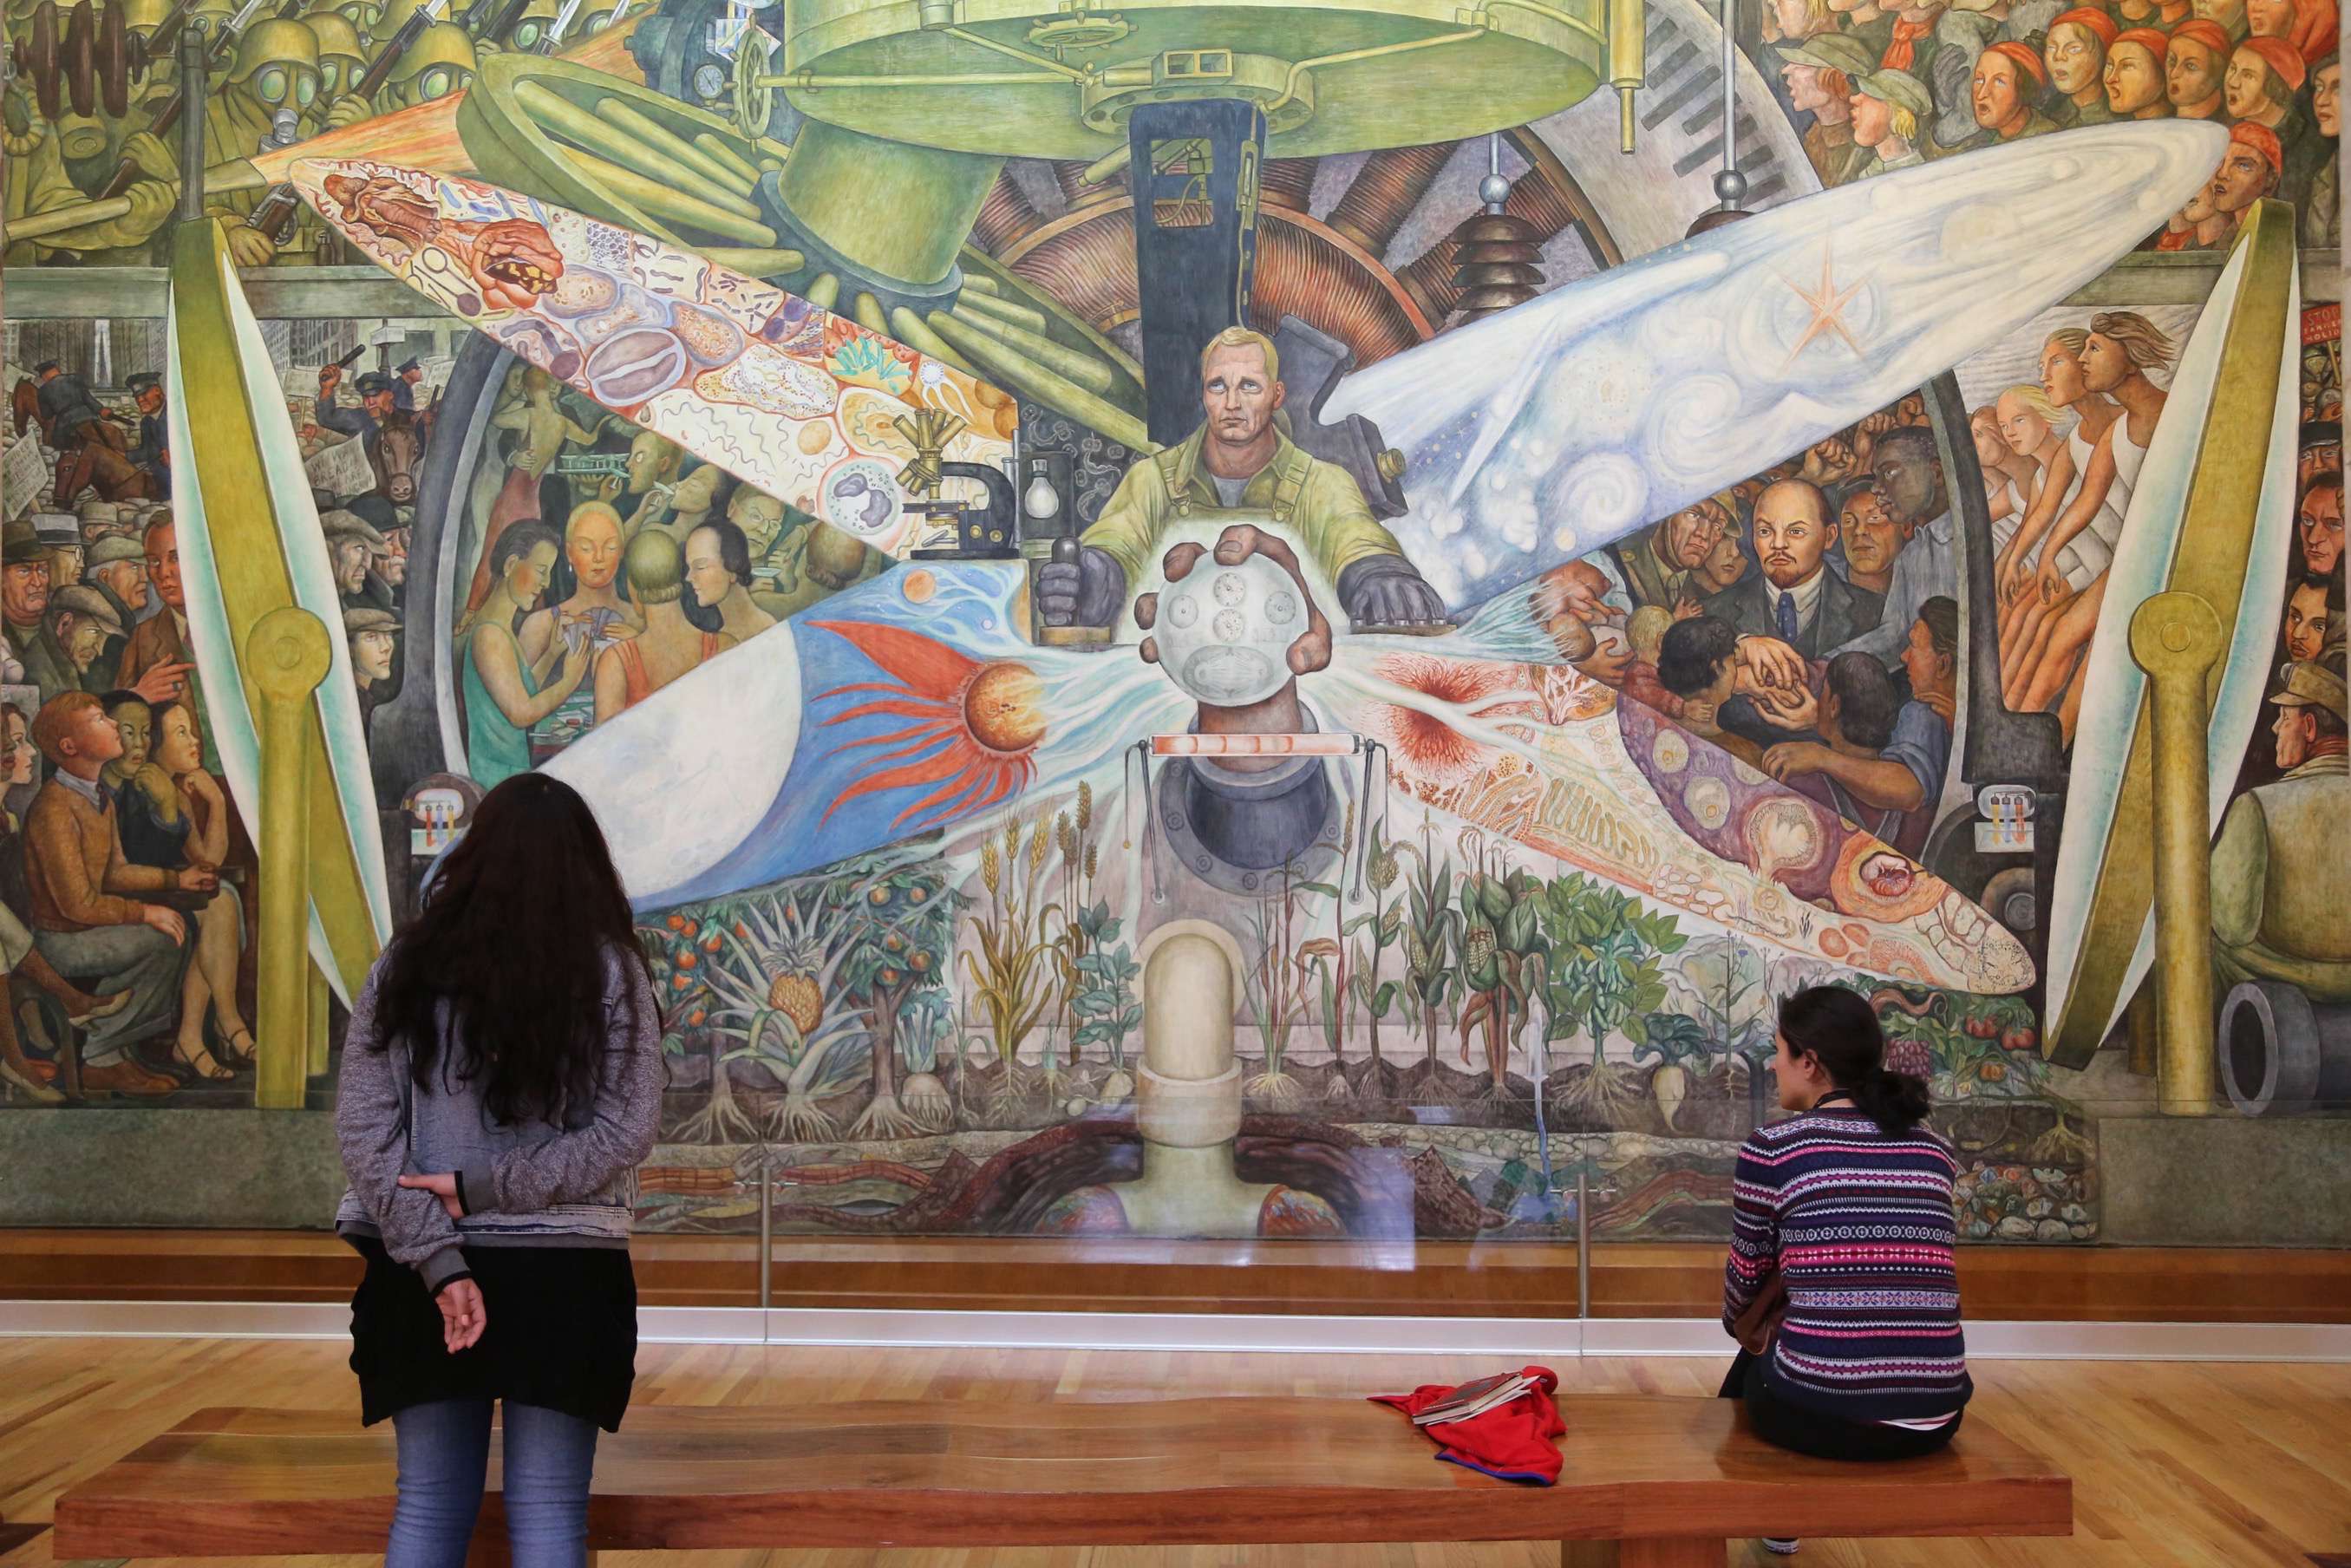 This is the re-created mural that Diego Rivera had painted for Rockefeller Center in New York City, before the Rockefeller's discovered the communist elements and it was chiseled off the wall. Rivera later recreated the masterpiece at Bellas Artes in Mexico City.